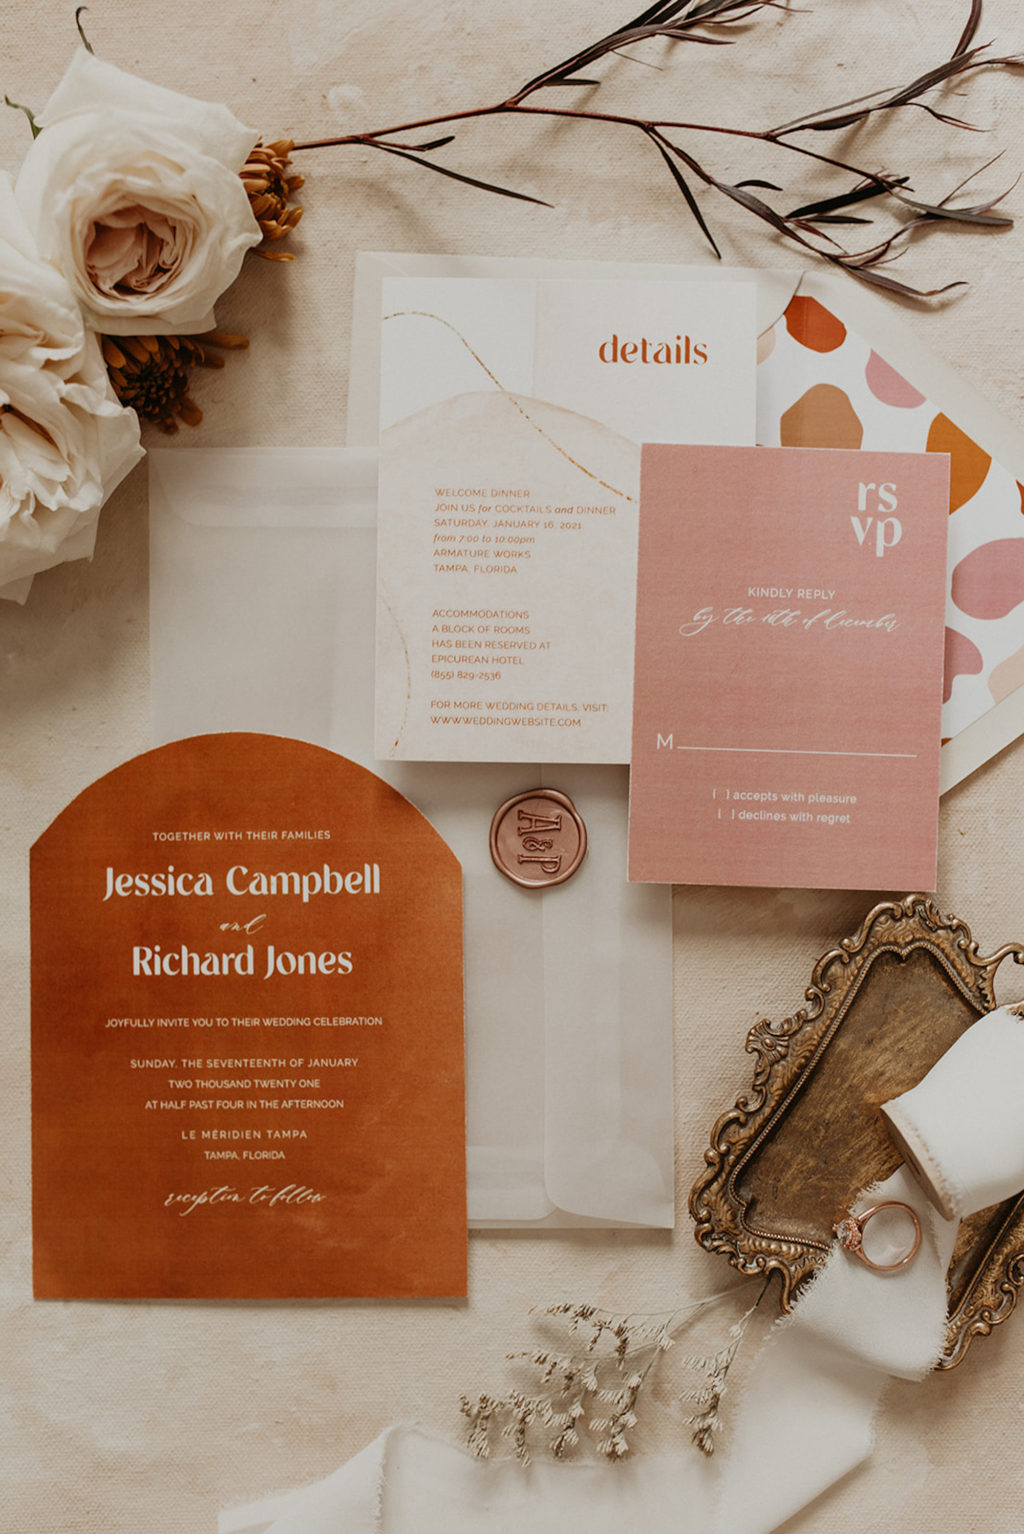 Tampa Bay Custom Wedding Invitations and Stationery | AP Design Co | A&P Designs | A+P Design Co